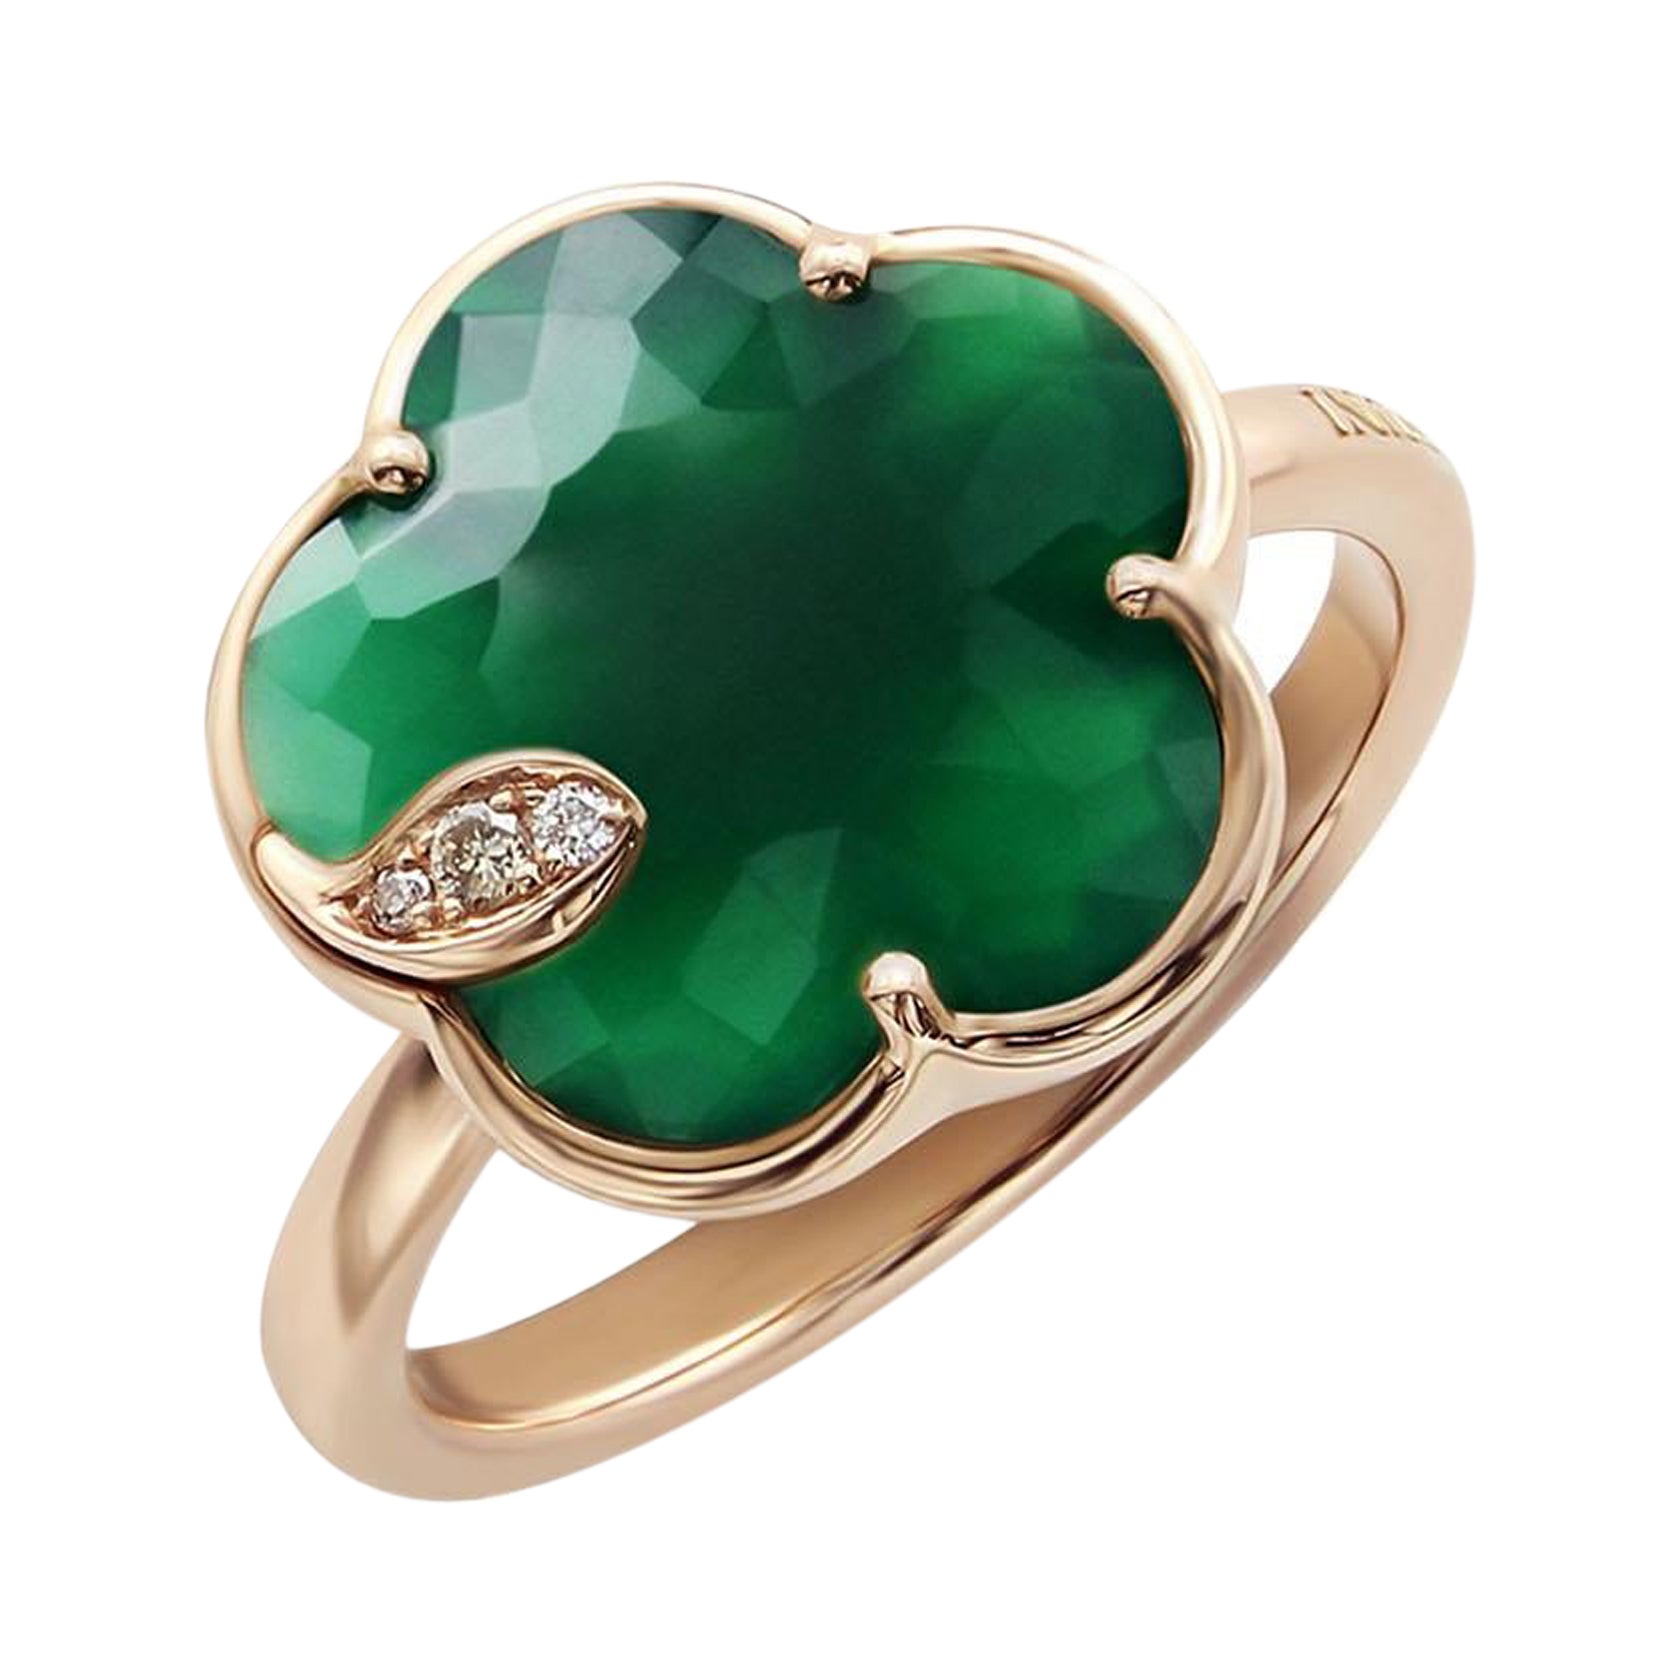 Pasquale Bruni 18kt Rose Gold Petit Jolie Agate and Diamond Ring